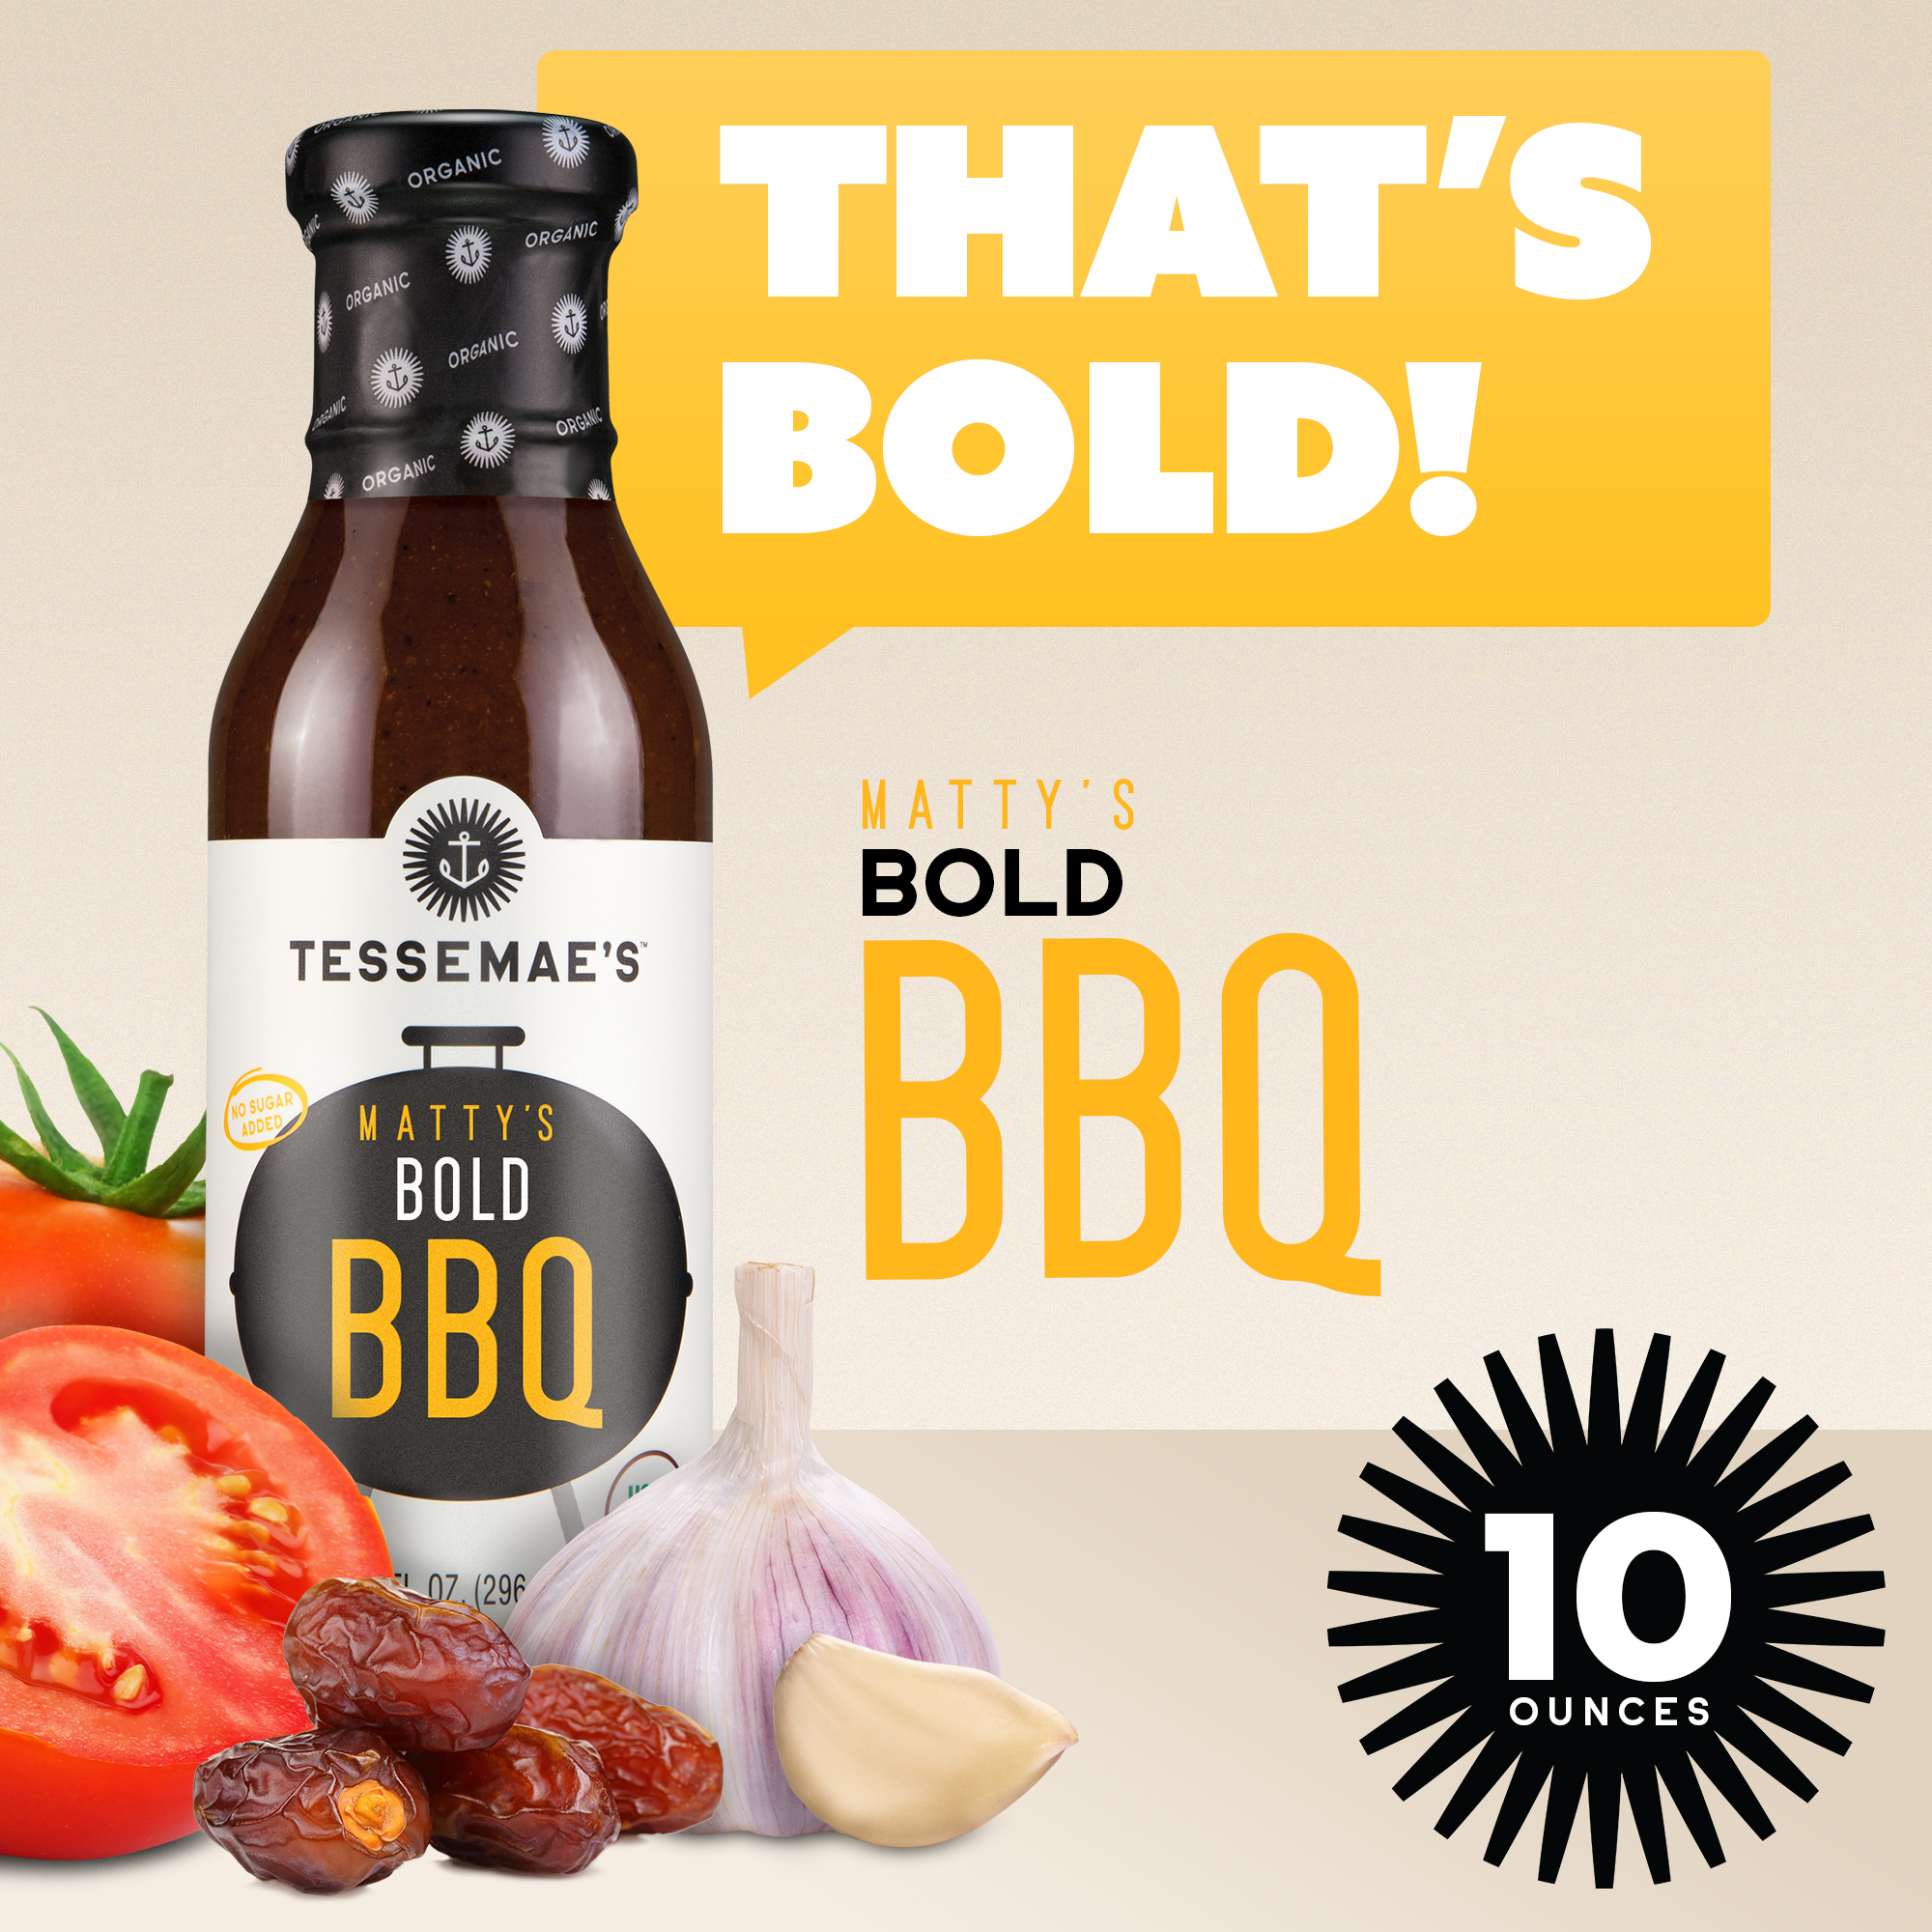 Tessemae's Organic Bold BBQ Sauce, 10 fl oz, No Sugar Added, Vegan, Dairy Free, Whole 30 Approved, Keto Friendly, Gluten Free Barbecue Sauce - image 2 of 6